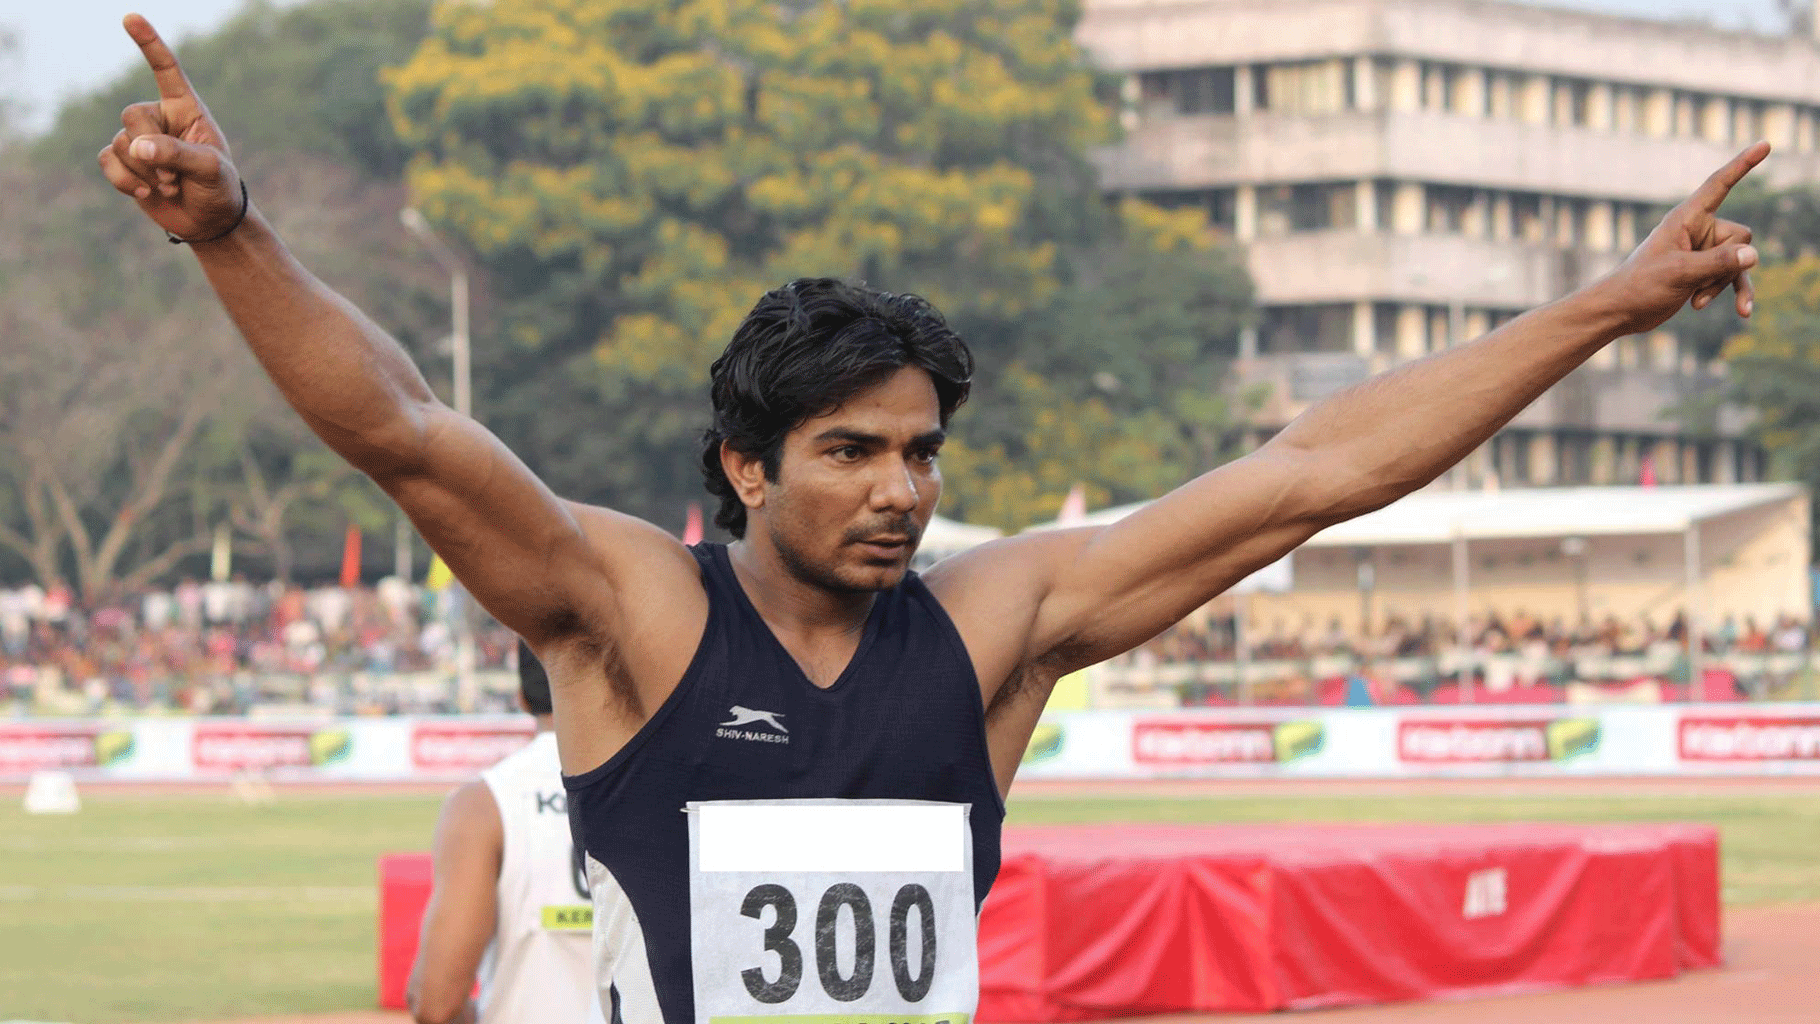 Dharambir Singh. (Photo Courtesy: <a href="https://www.facebook.com/AFIIndiaofficial/photos/pcb.994765680642483/994765503975834/?type=3&amp;theater">Facebook/Athletics Federation of India</a>)